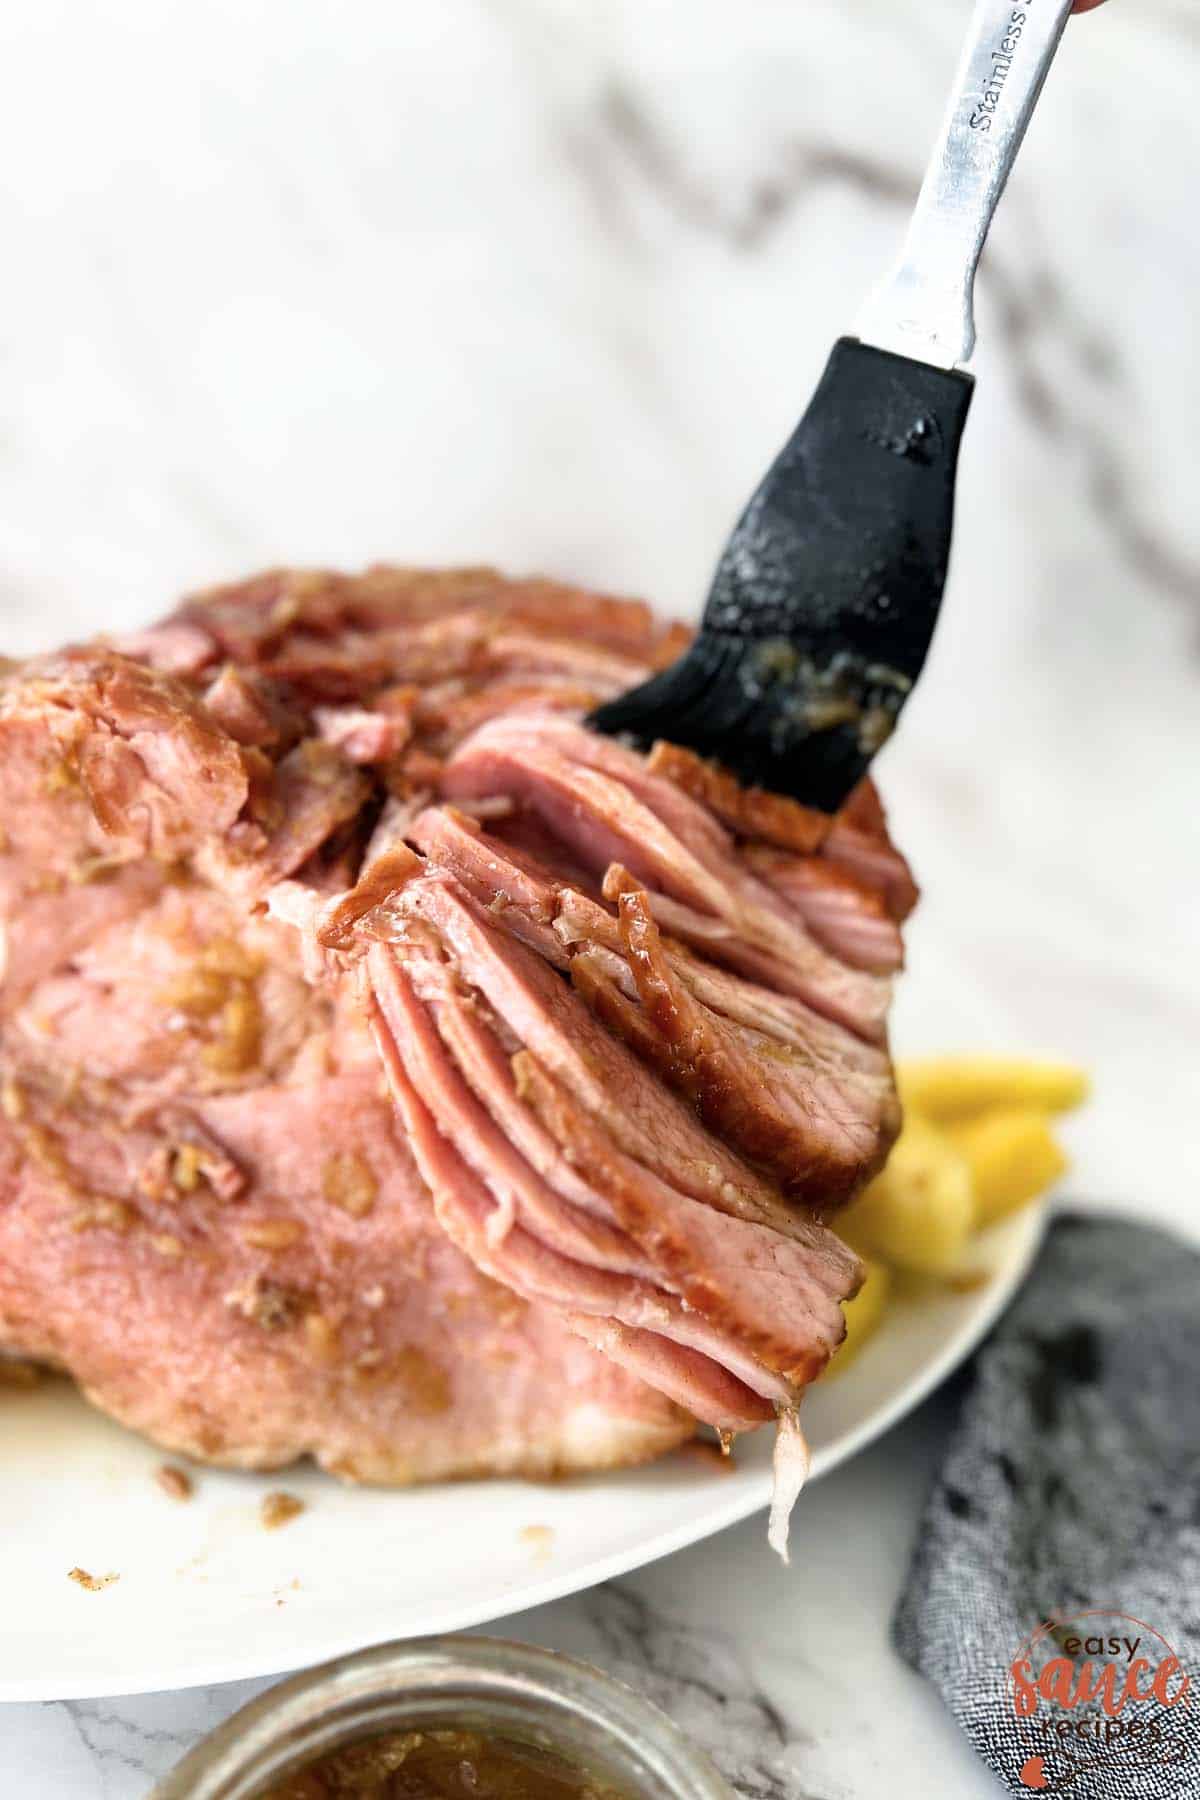 brushing a ham with pineapple glaze over the slices